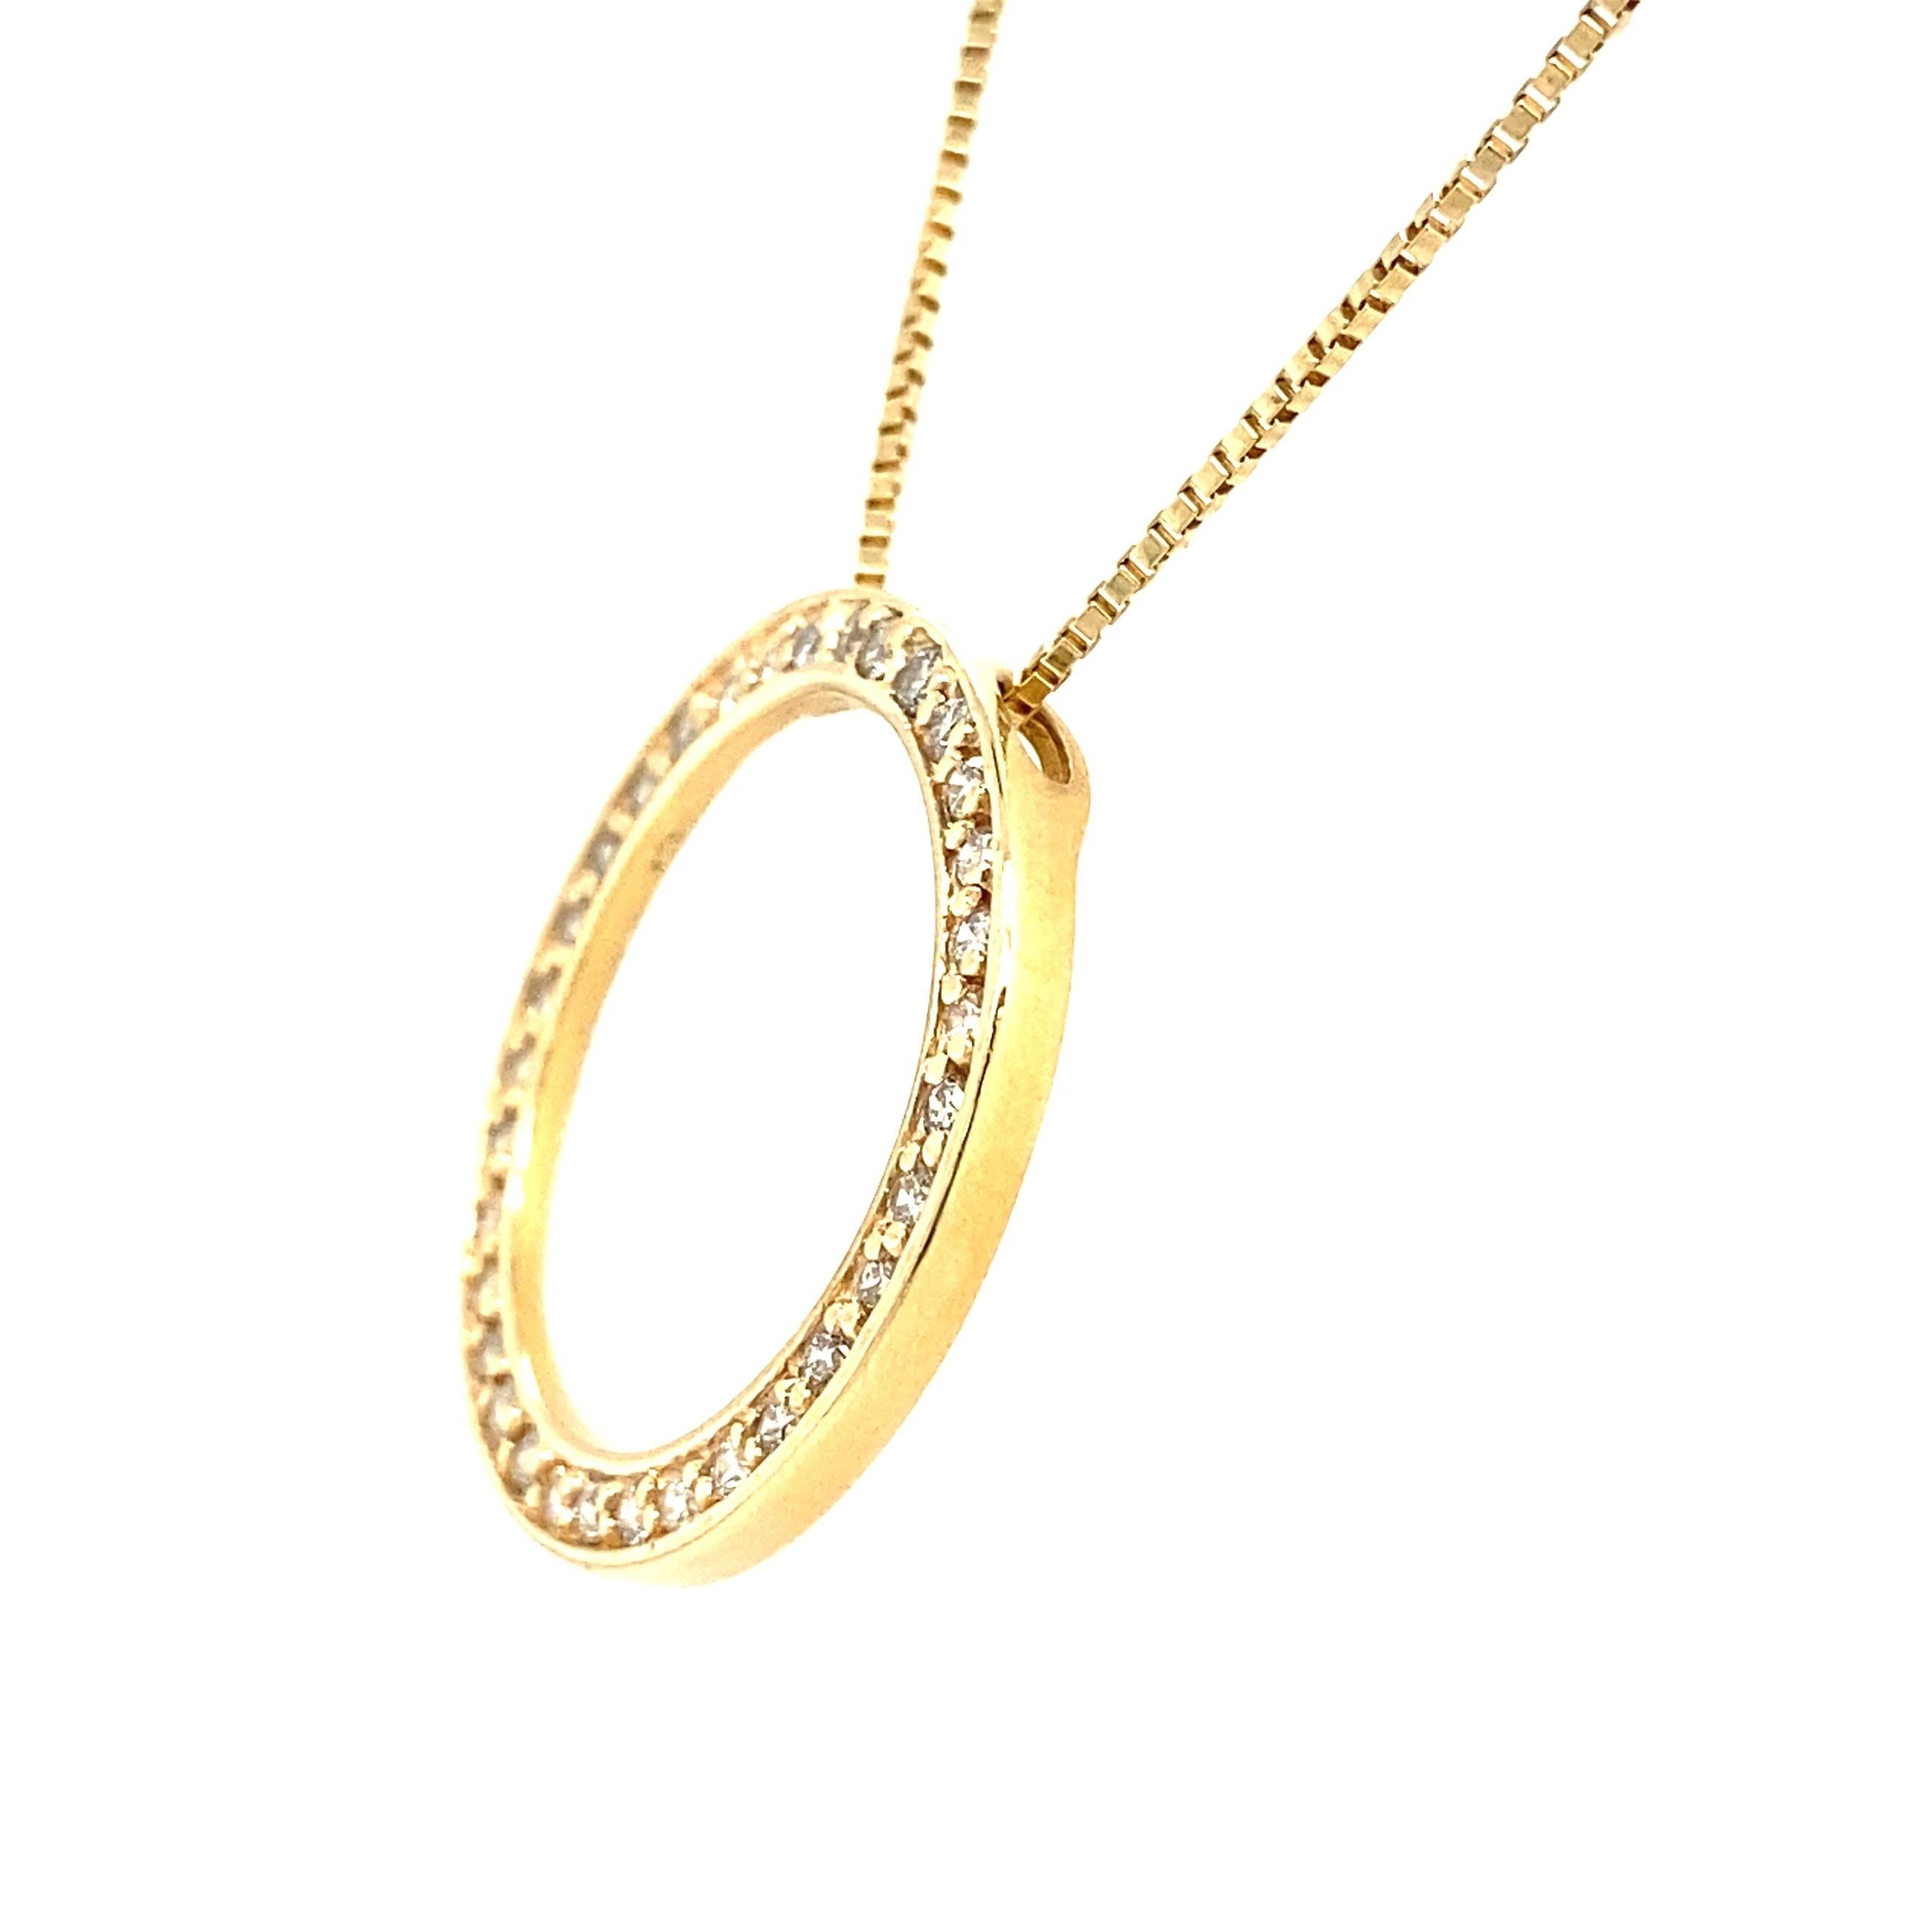 The circle has long been associated with undying devotion and love, as a circle has no end. While wedding bands might be the most common use of the unending circle, this diamond-set pendant has the same loving meaning. This 14K yellow gold version